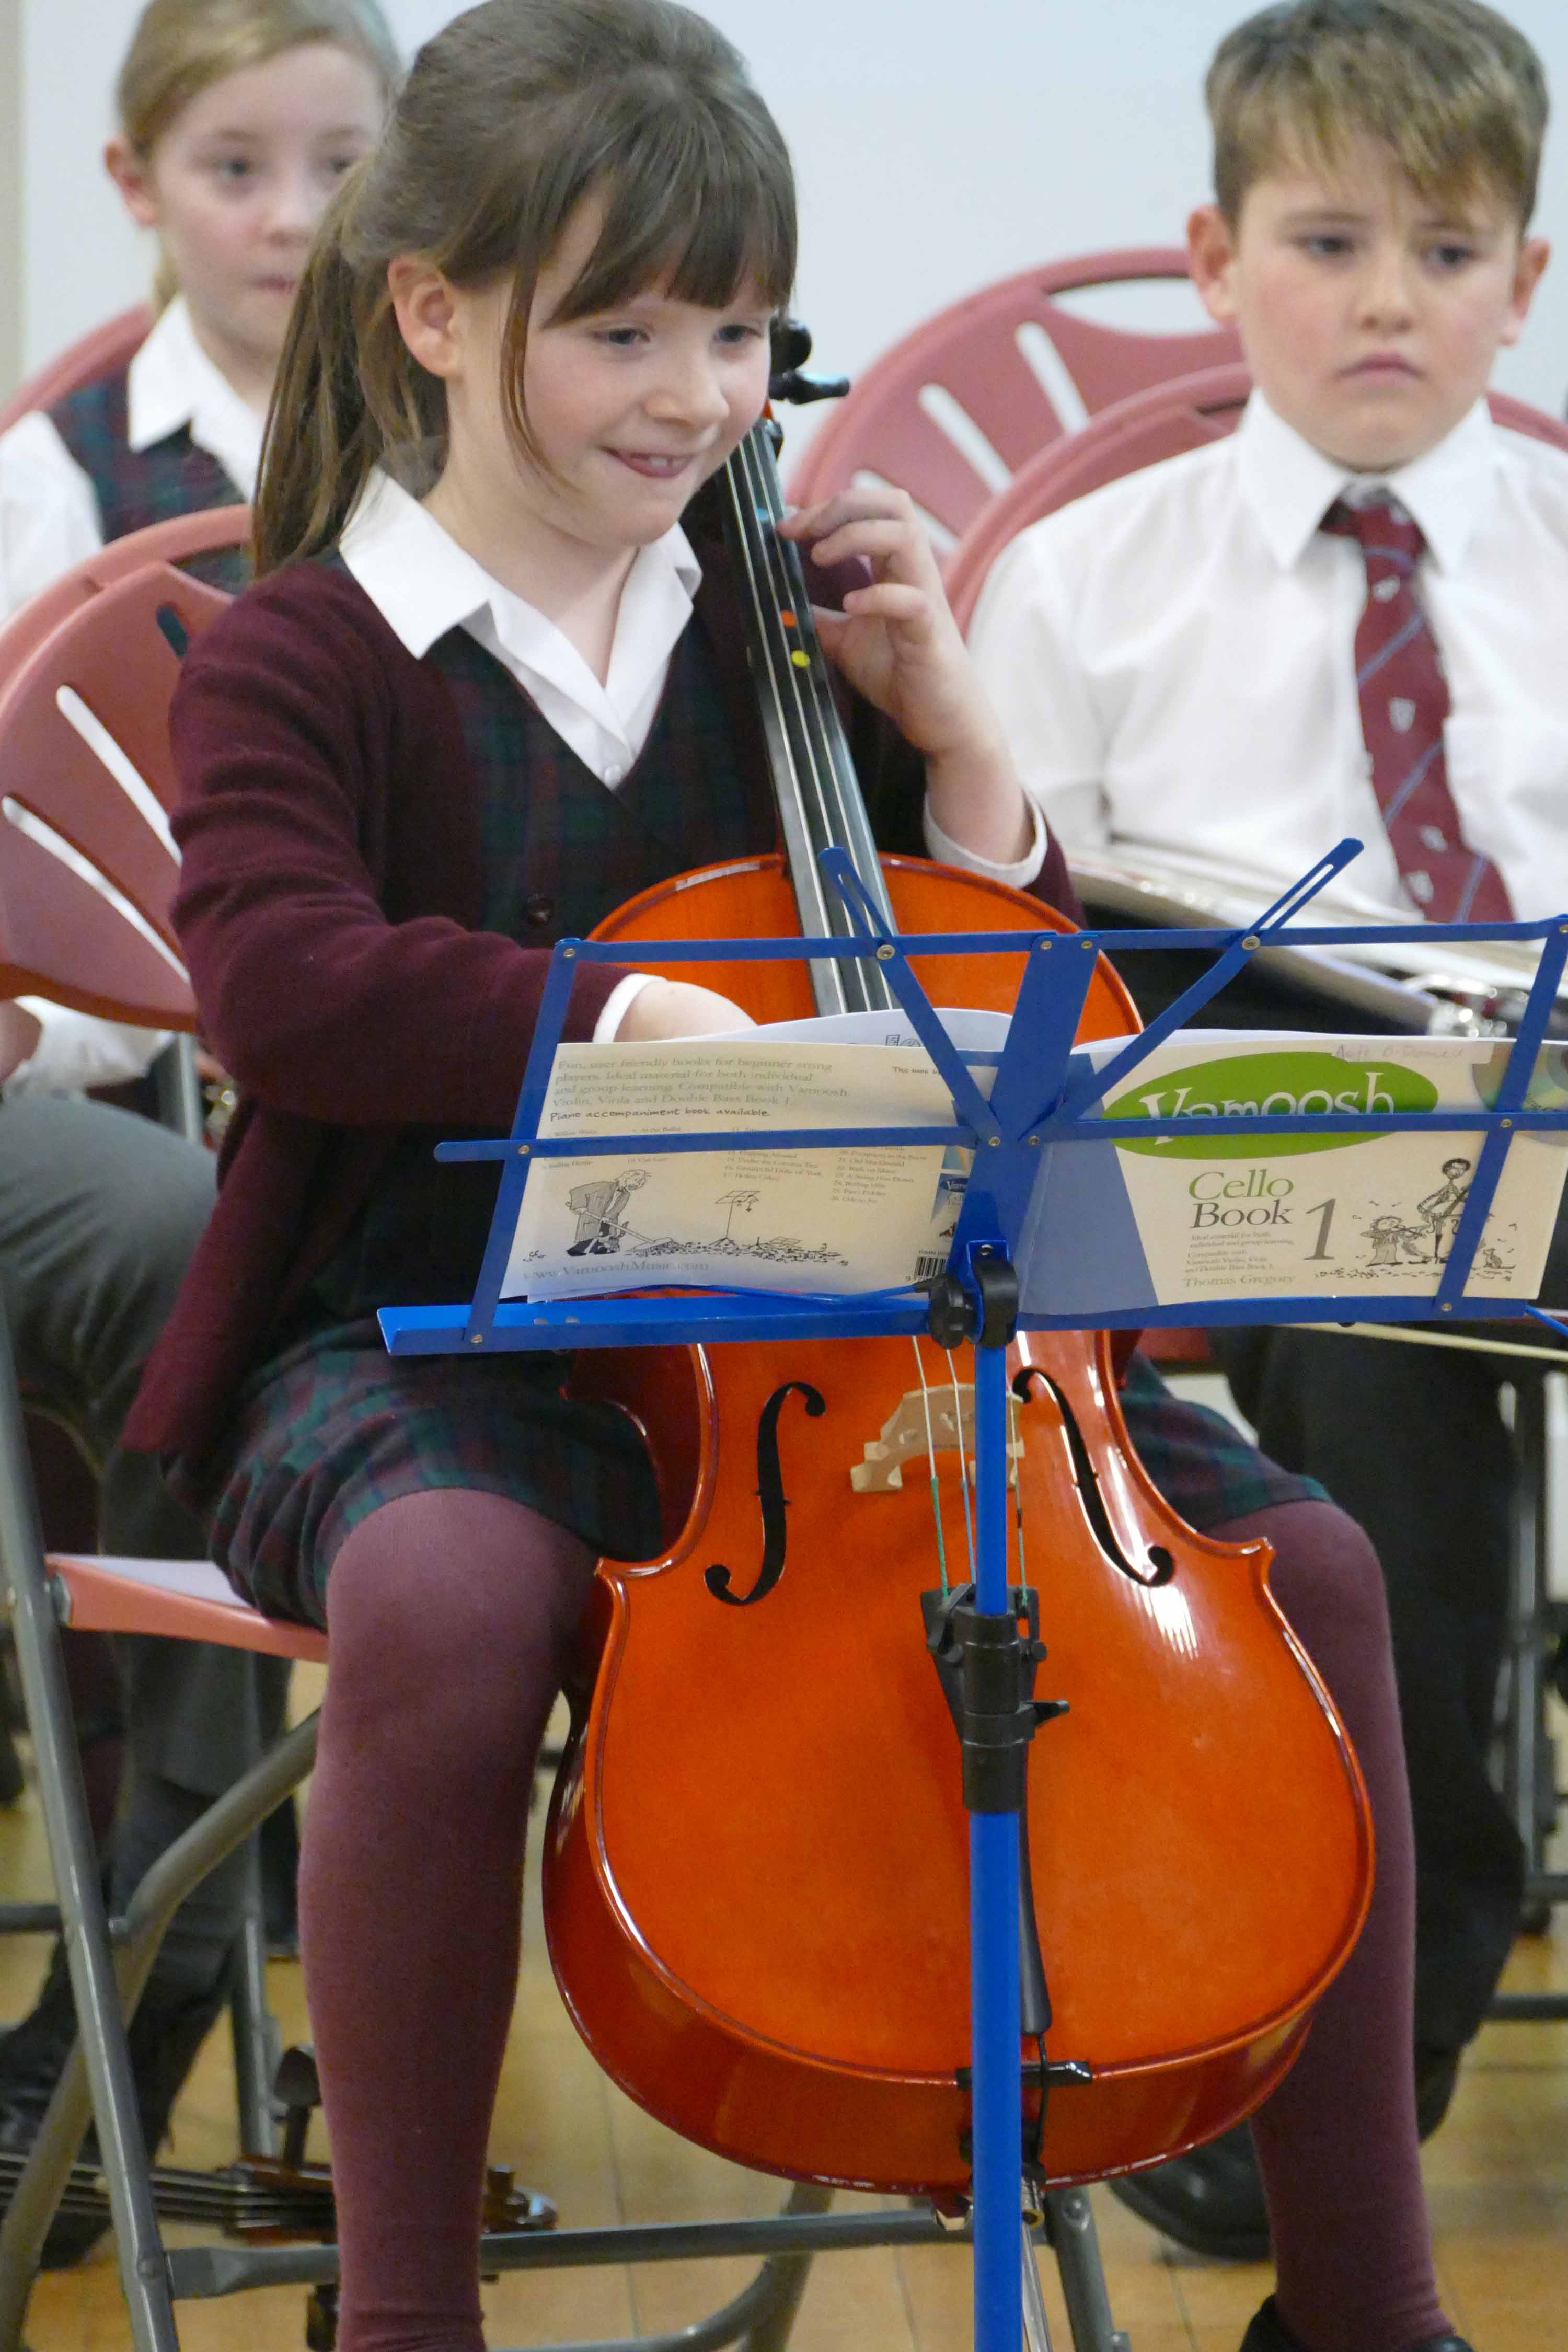 Musical Moments at the Prep School (5th Feb 2018)